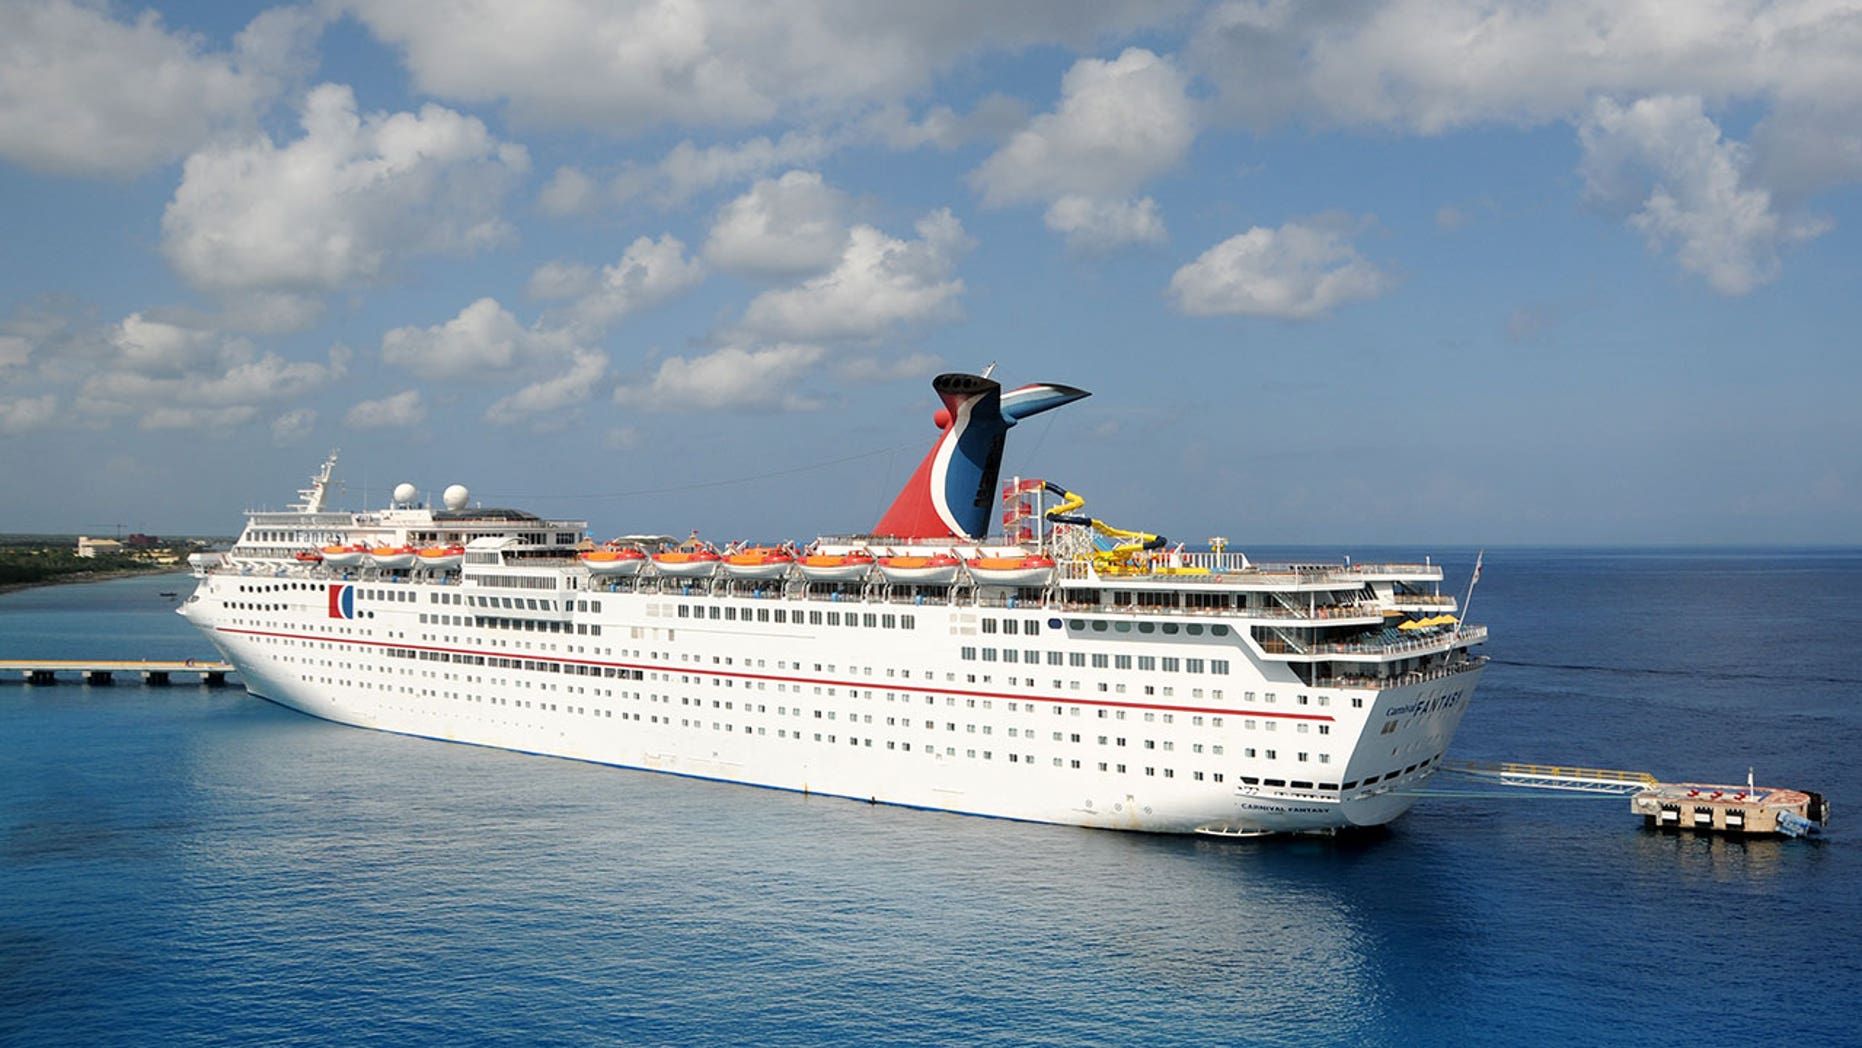 Carnival Cruise changes smoking policy; offenders can be kicked off